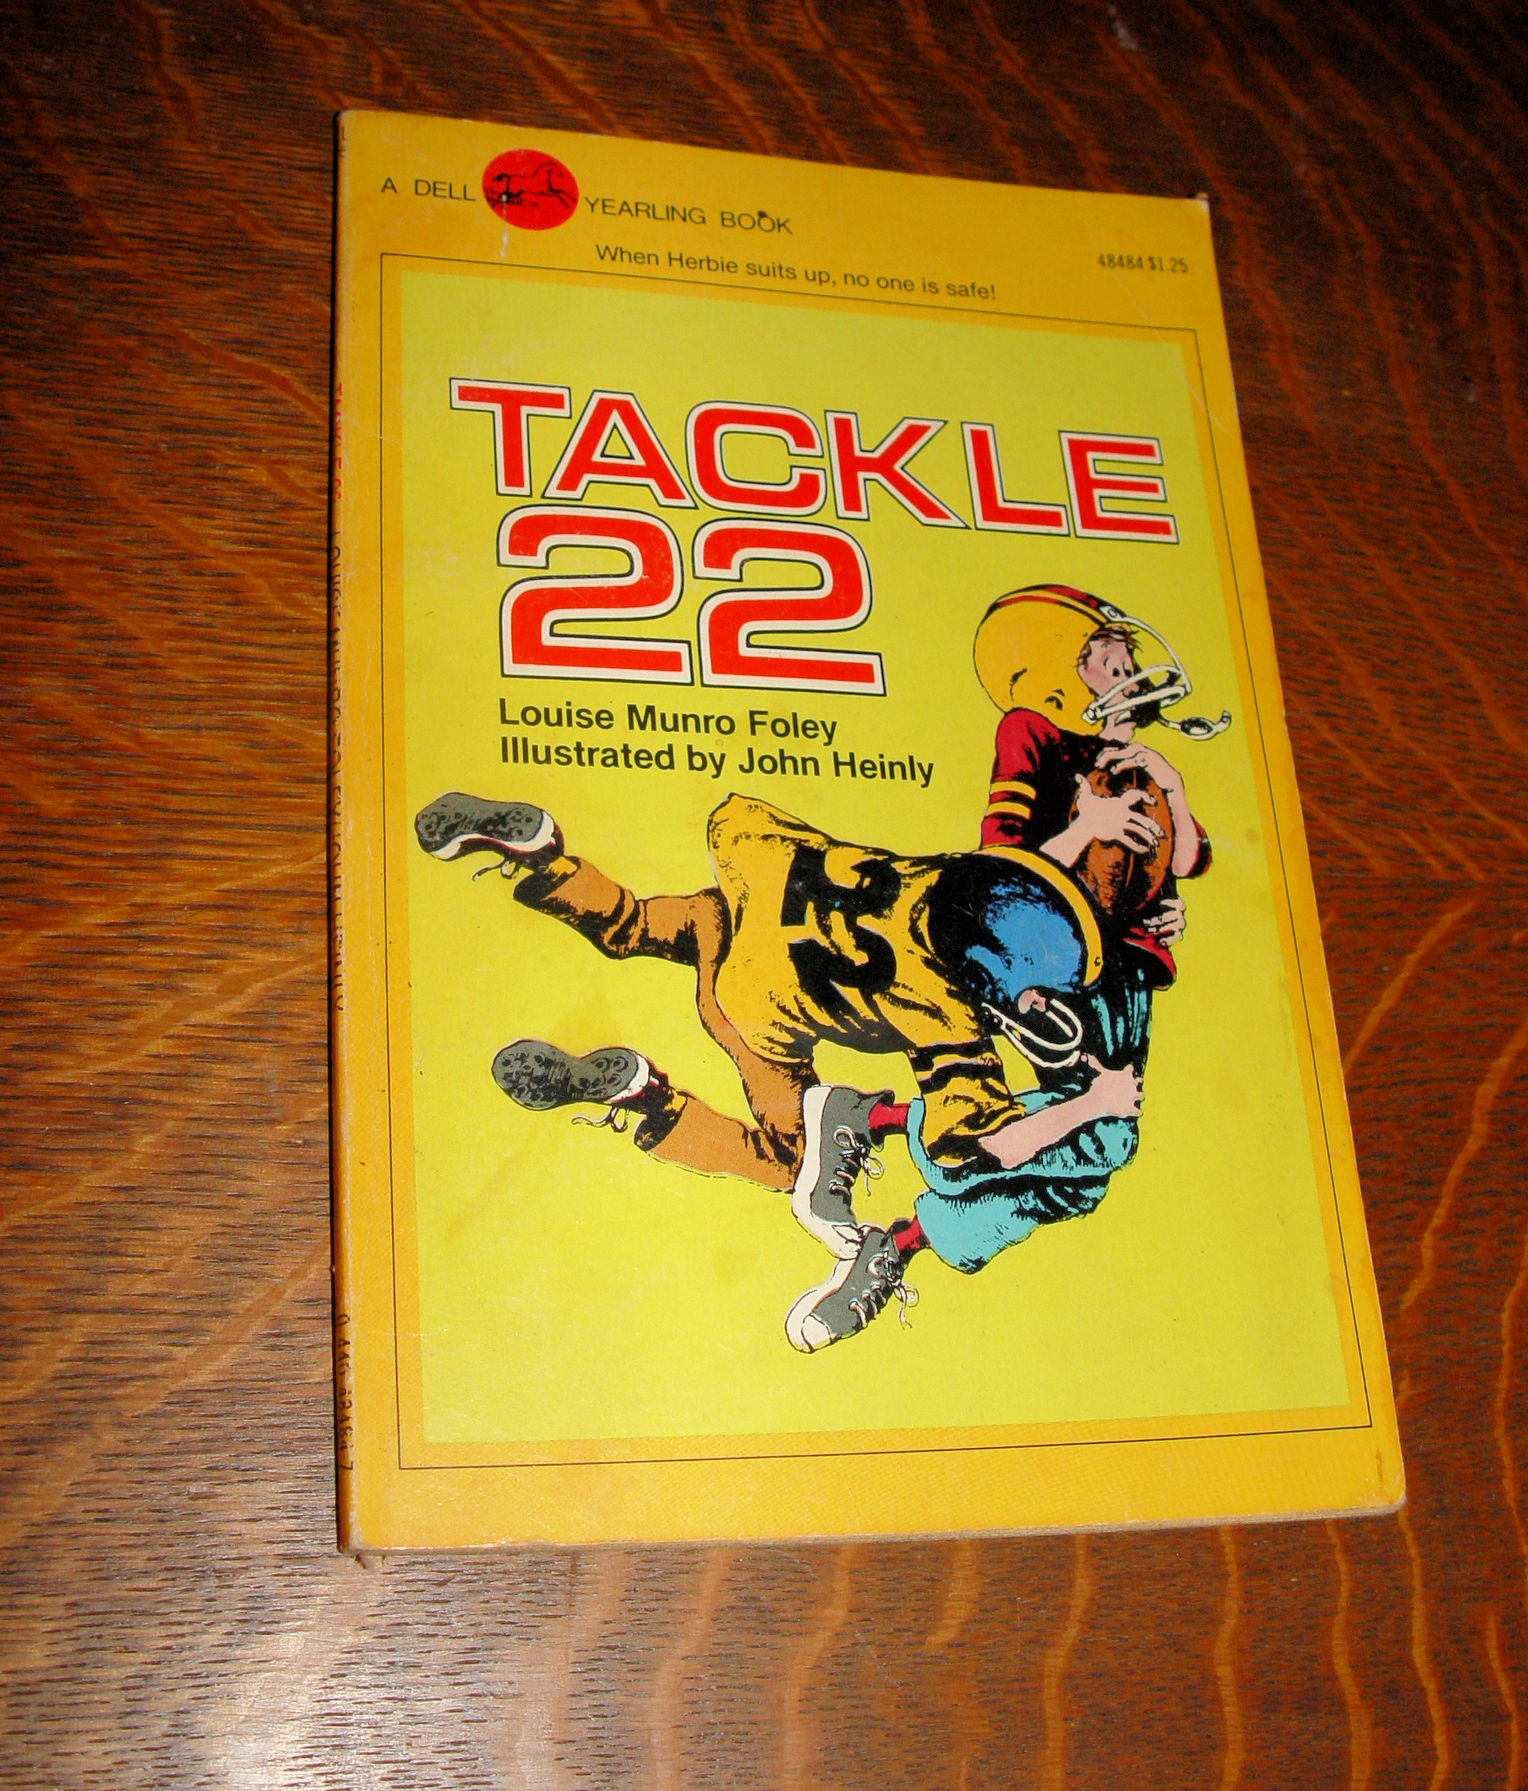 Tackle 22 by Louise Munro Foley: Dell
                        Yearling Book 1978